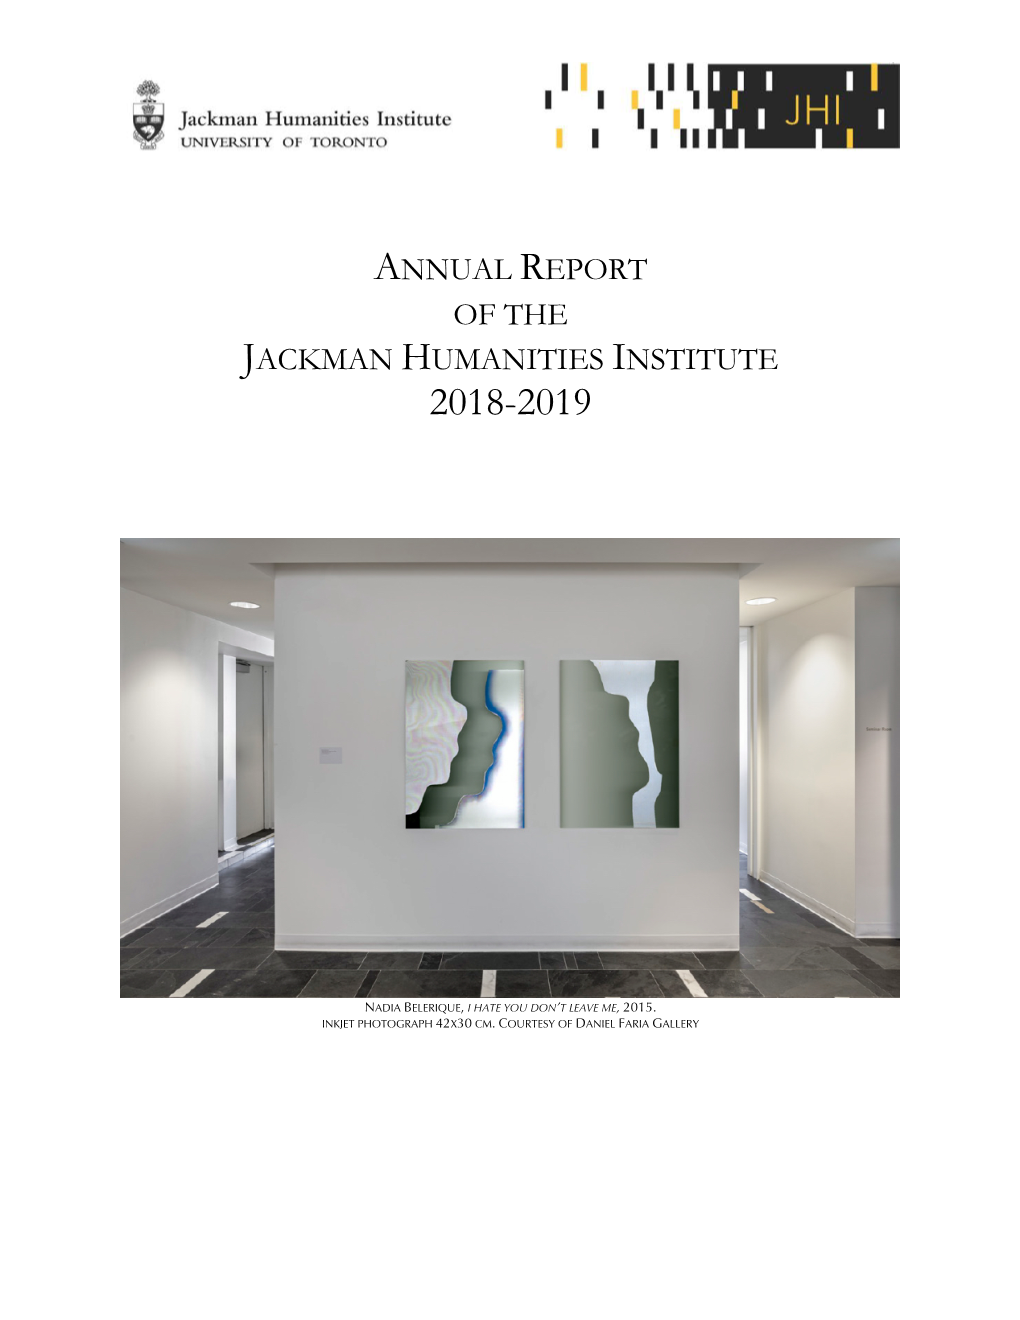 Annual Report of the Jackman Humanities Institute 2018-2019